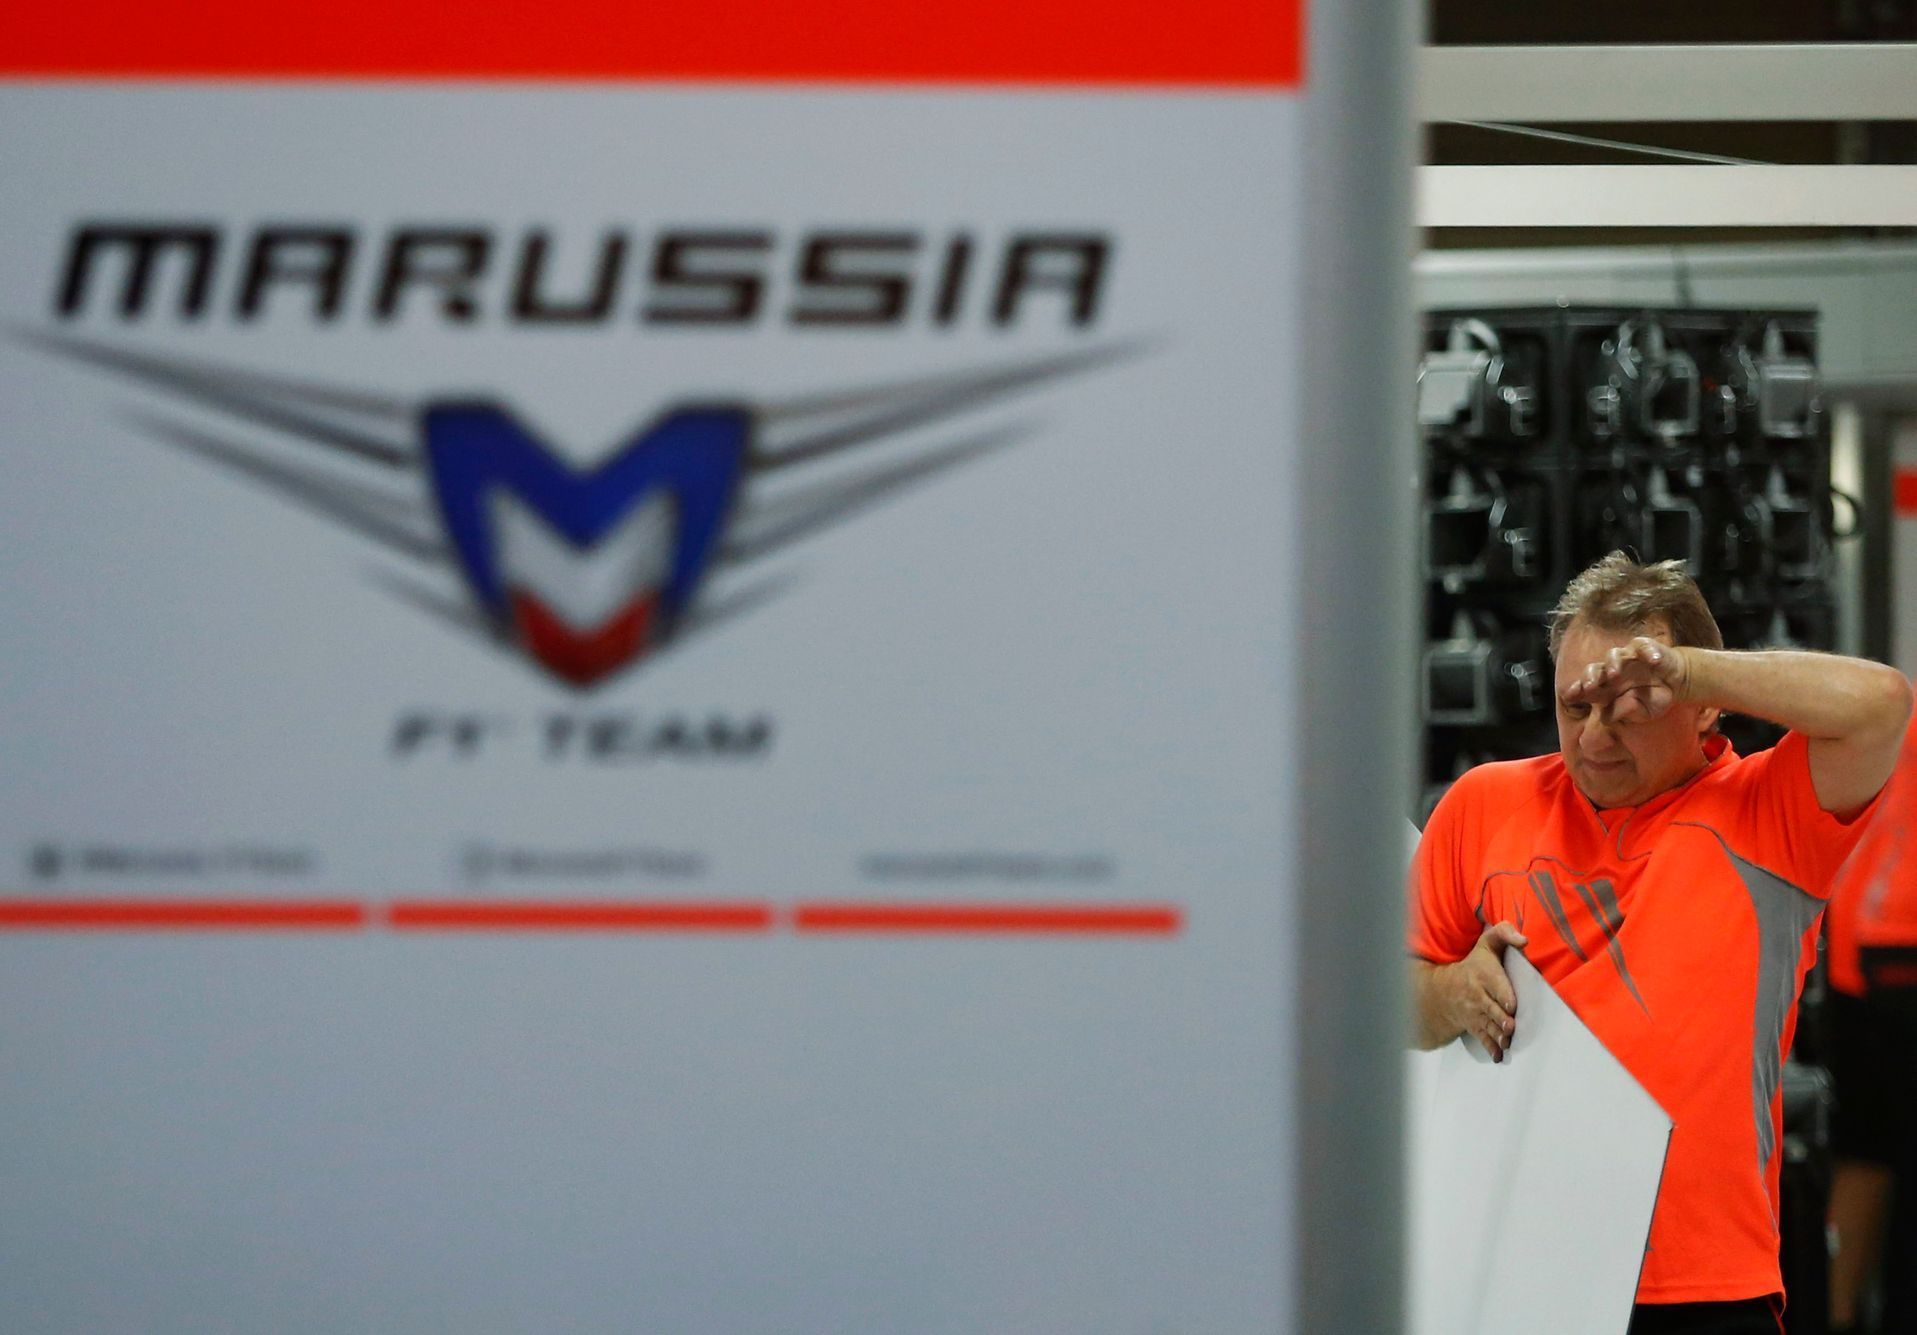 A pit crew of Marussia, which Formula One driver Jules Bianchi of France belongs to, wipes his face as he cleans up the pit after the Japanese F1 Grand Prix at the Suzuka Circuit